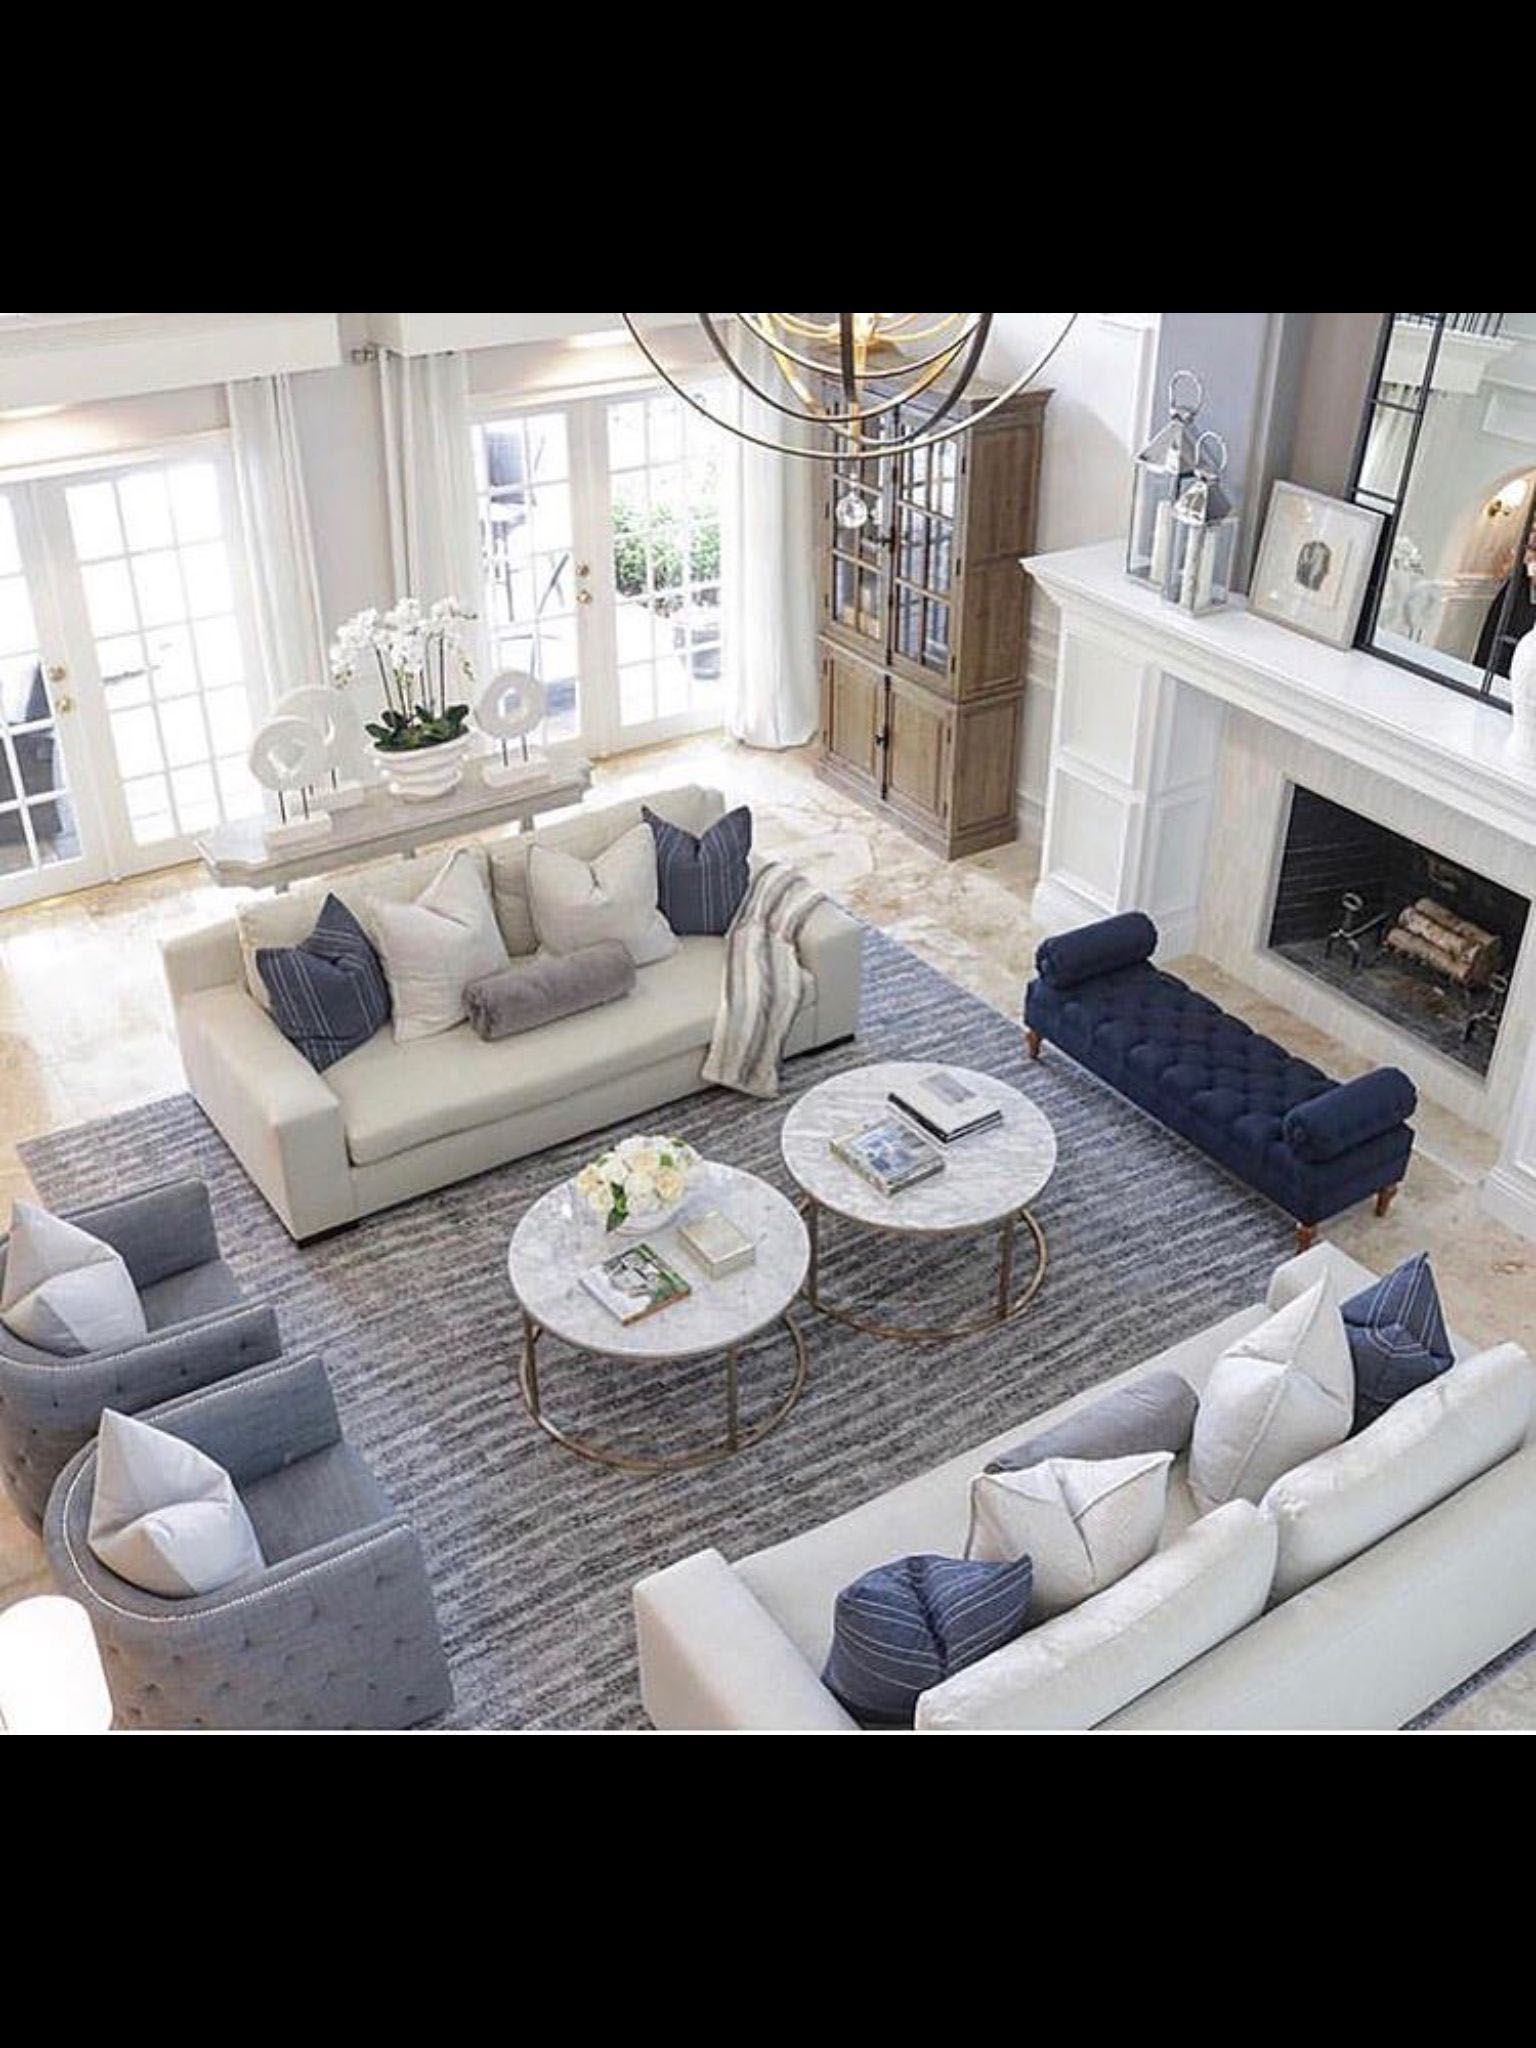 10 home accents Living Room chandeliers ideas